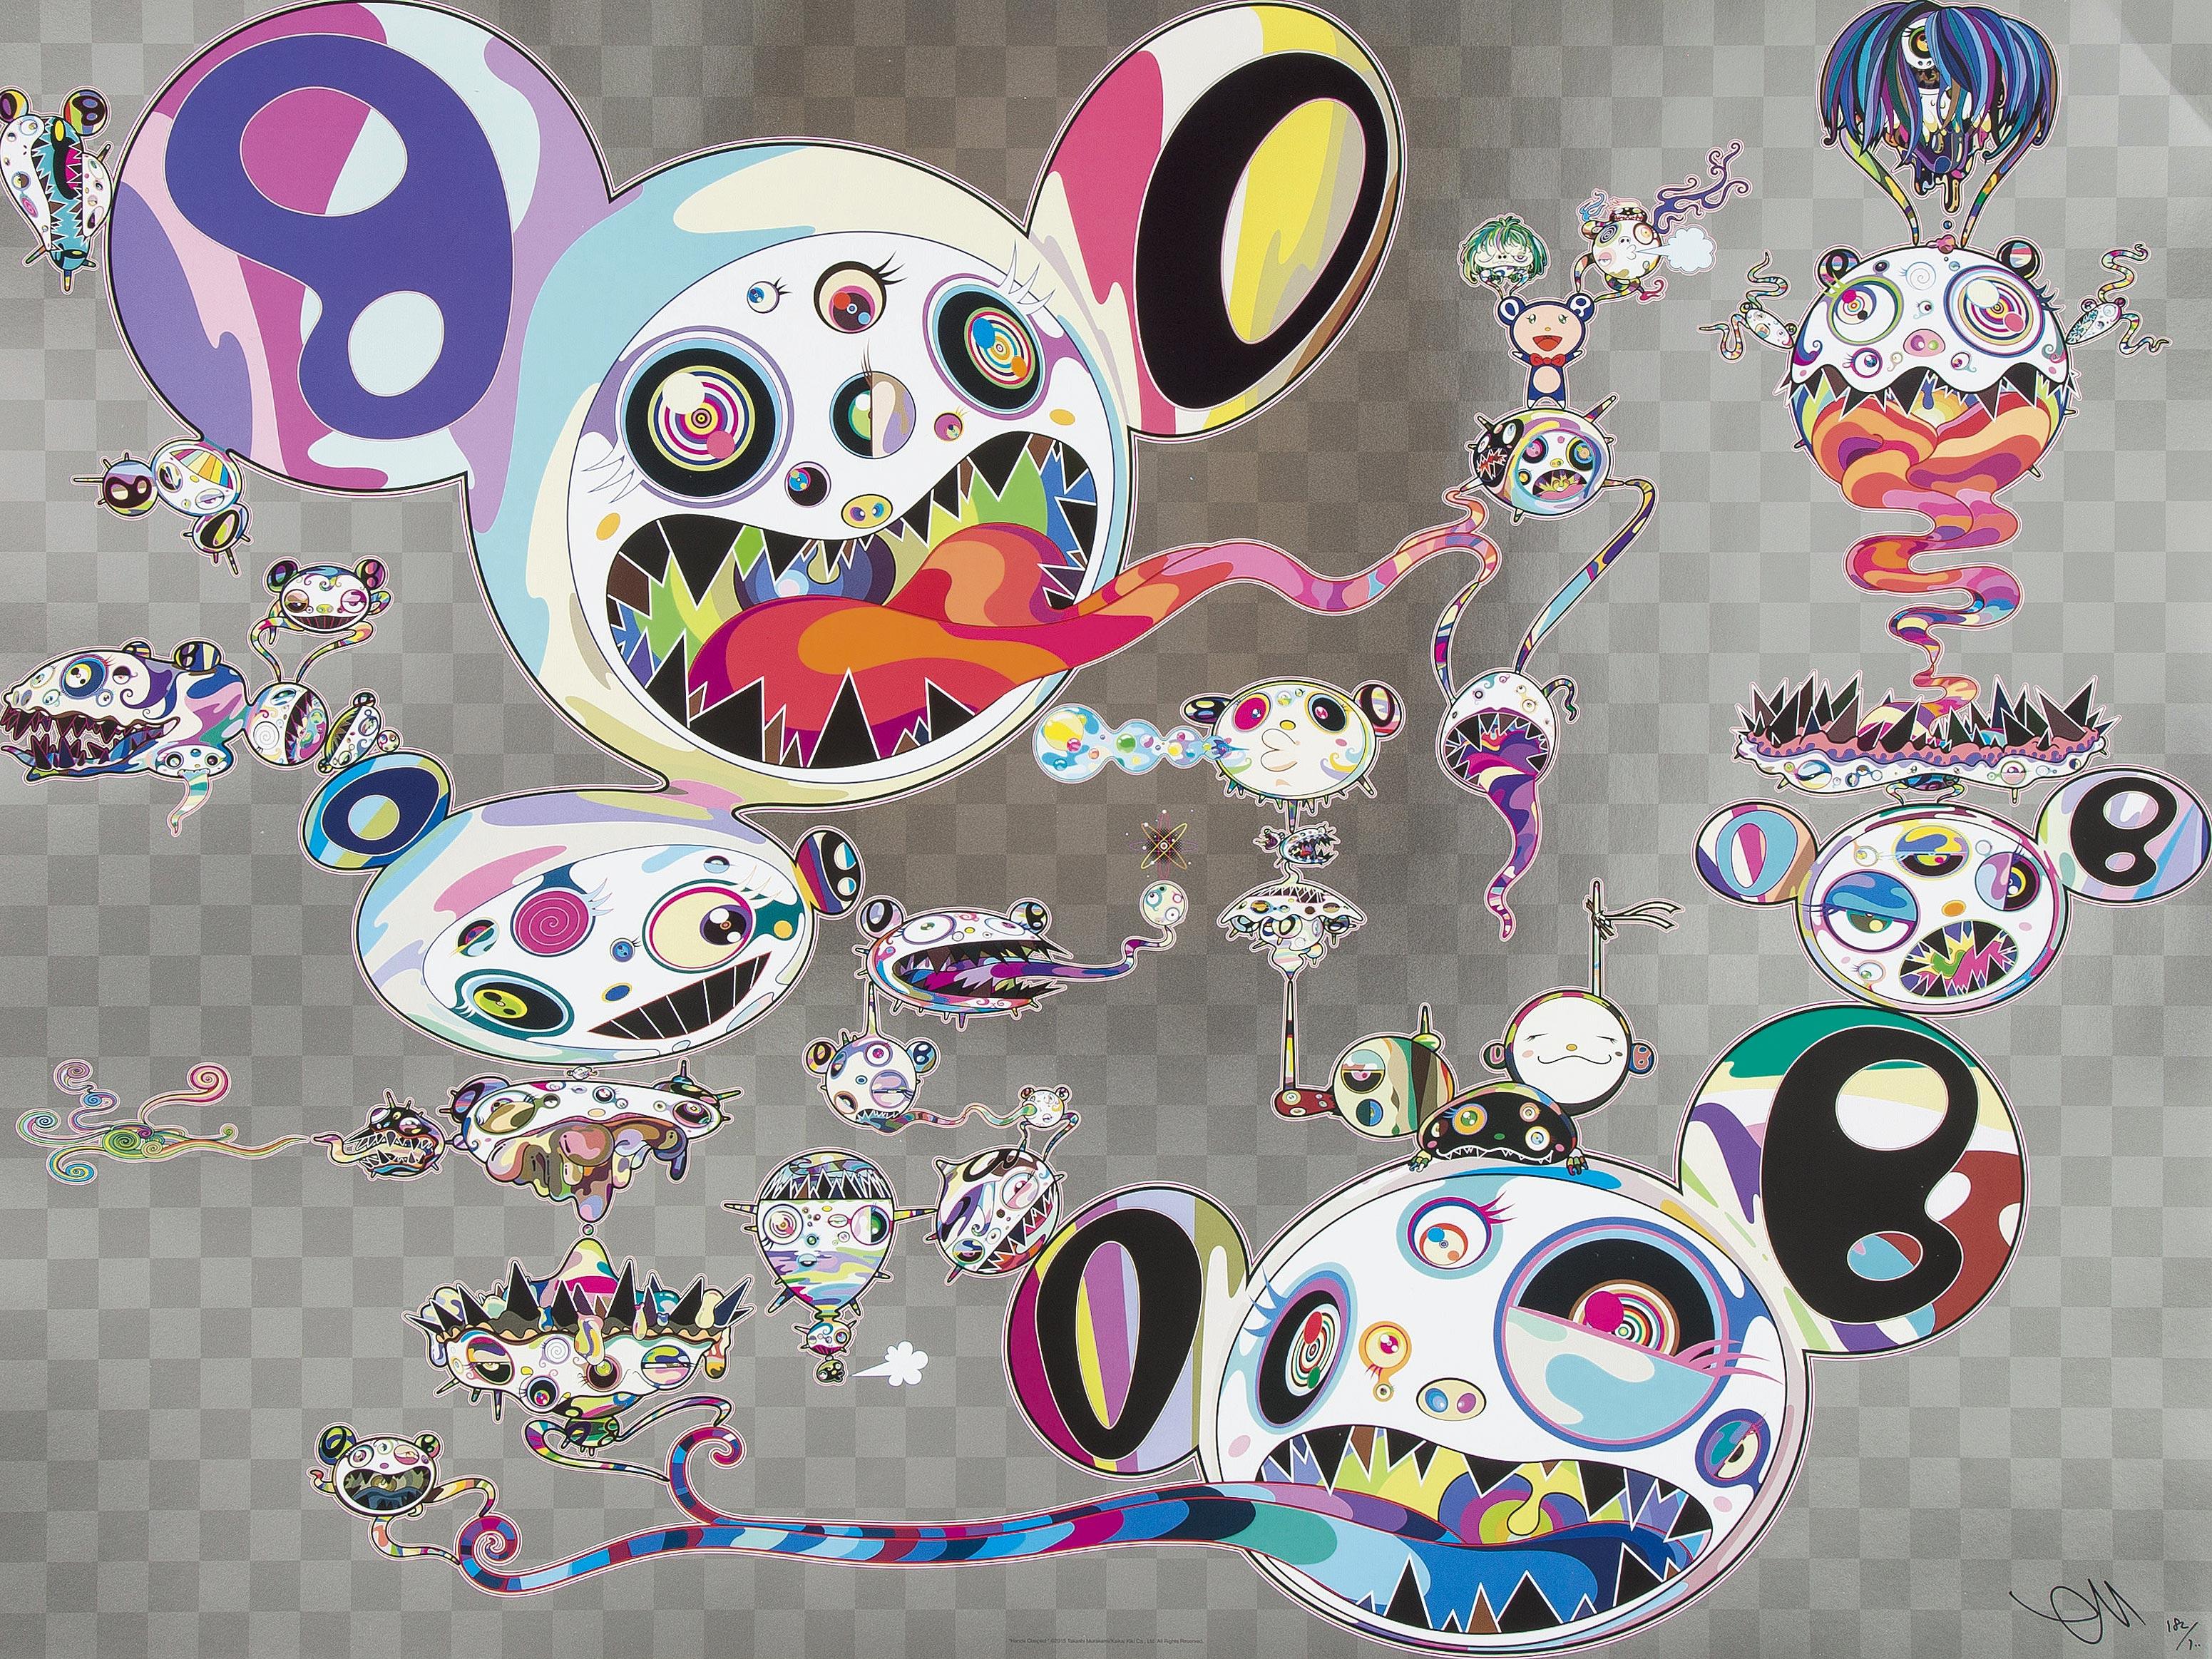 Hands clasped. Limited Edition (print) by Takashi Murakami signed, numbered